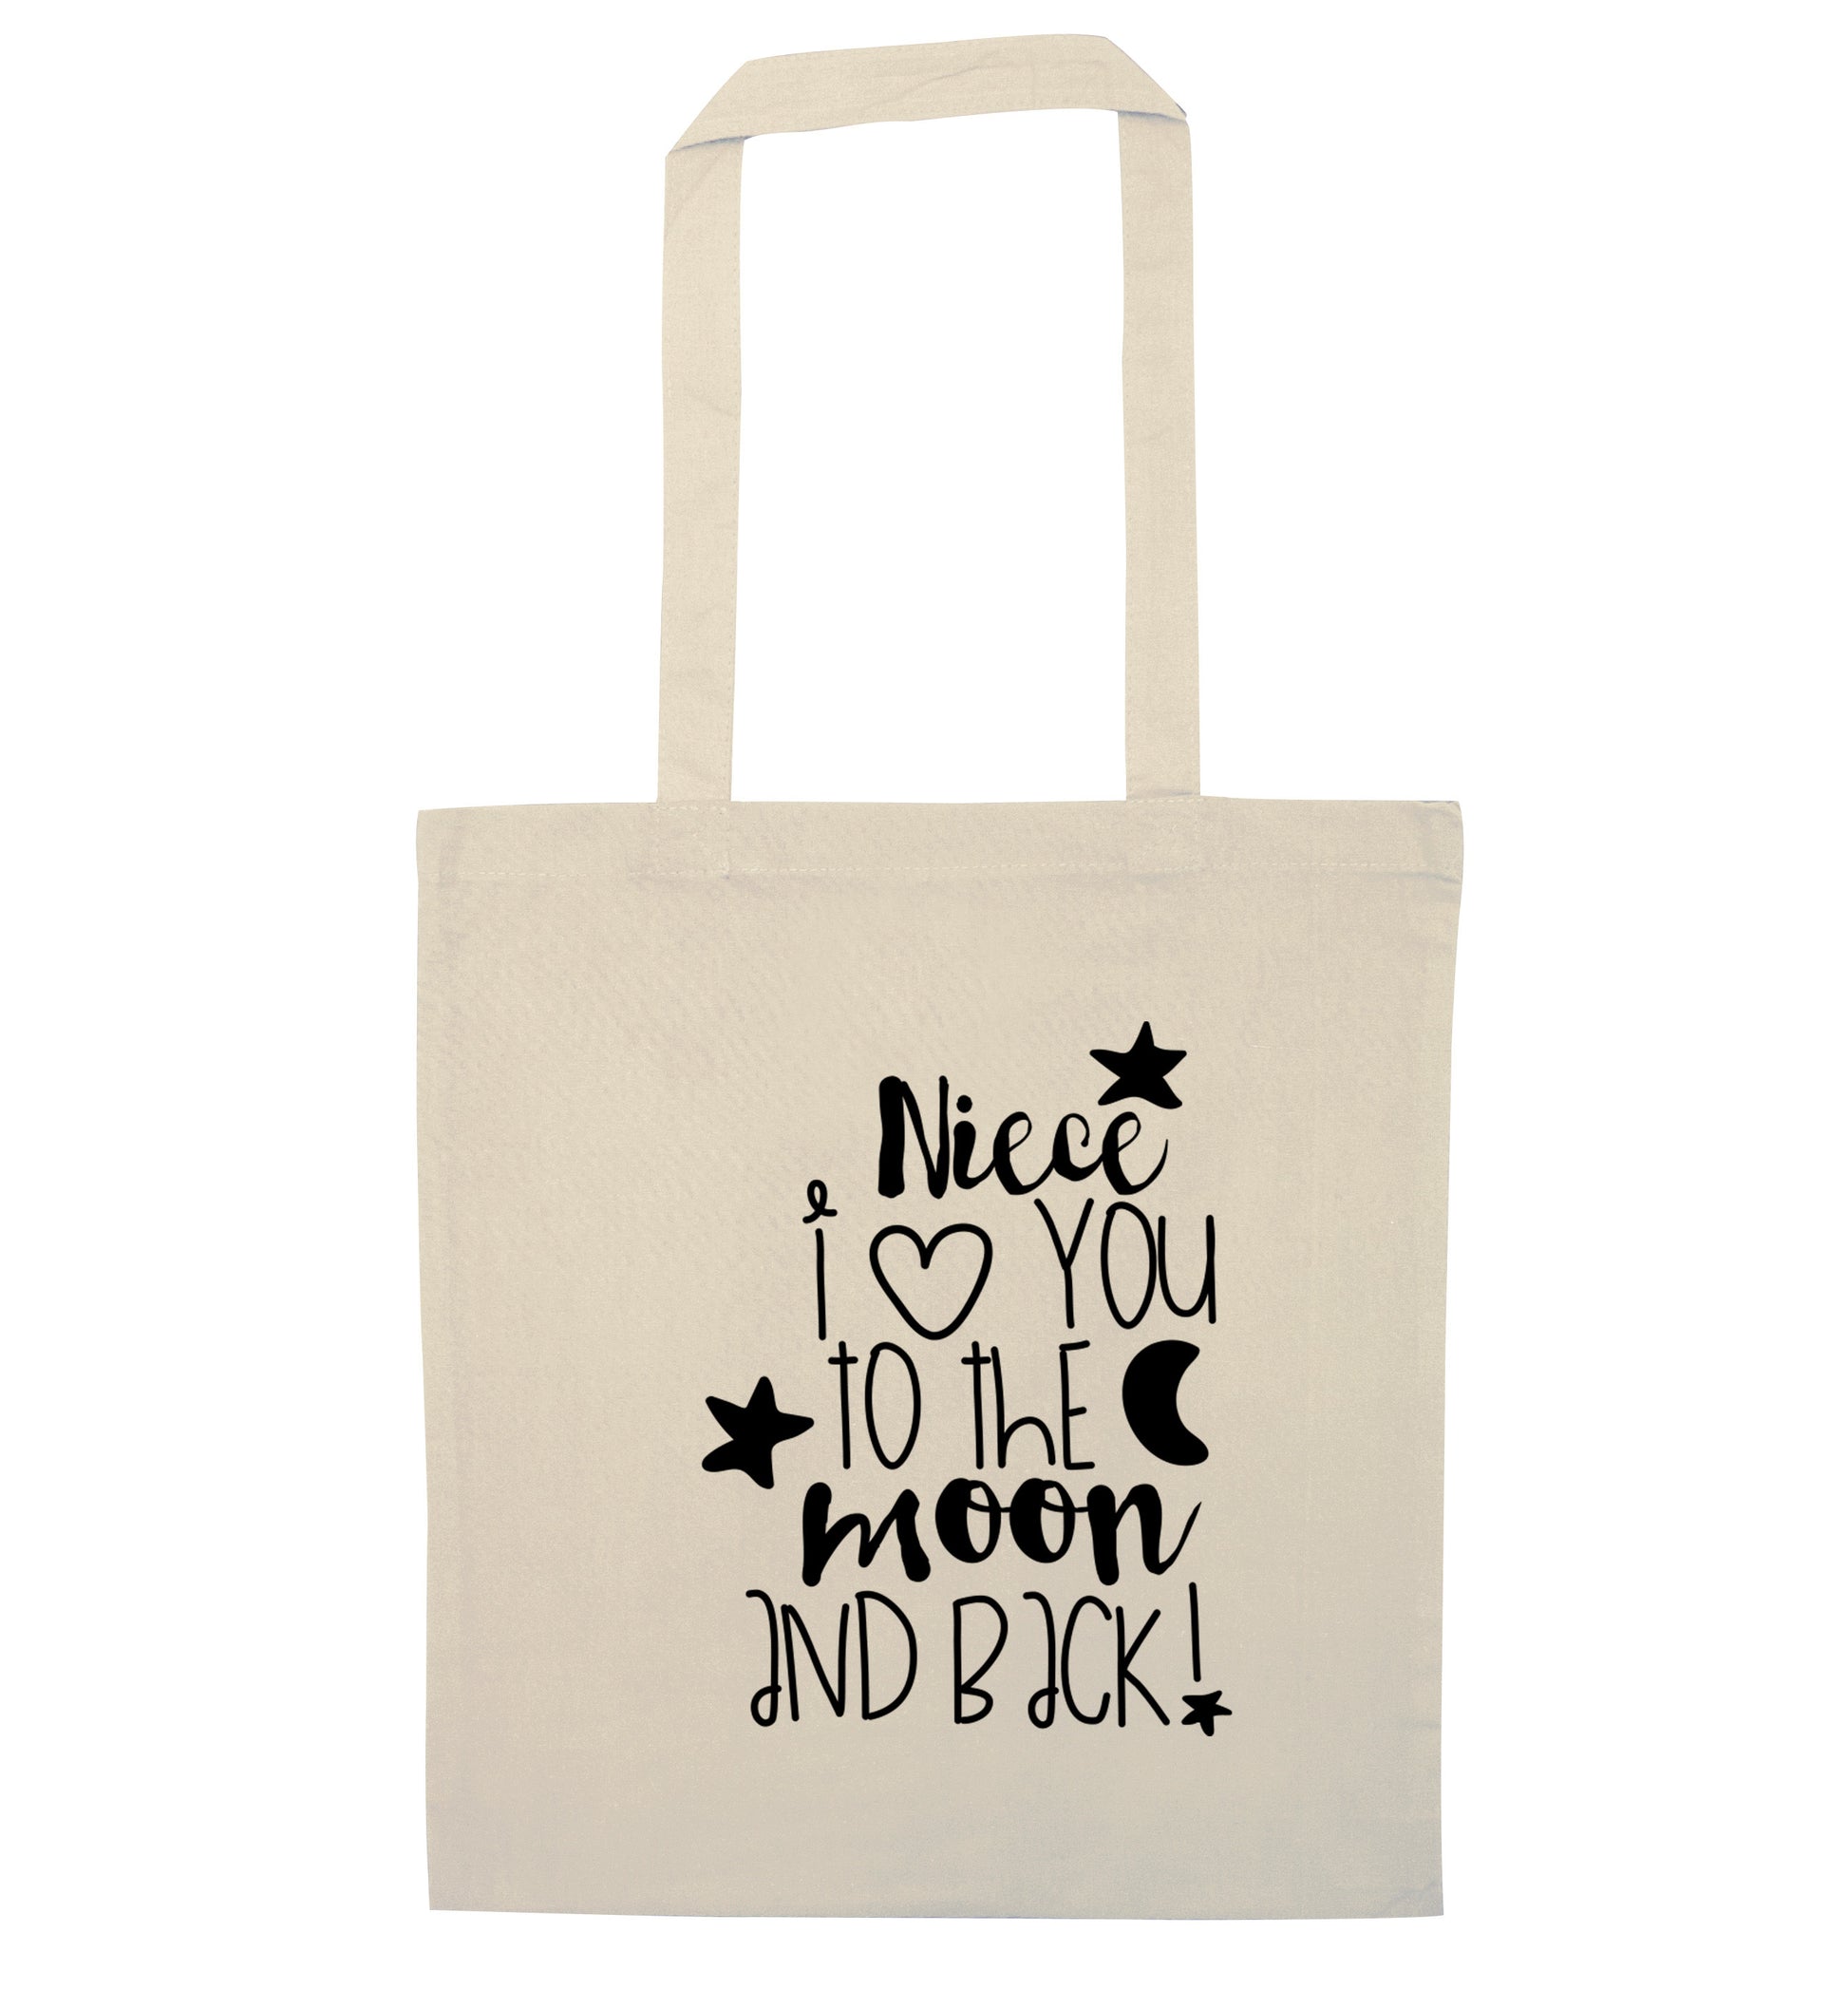 Niece I love you to the moon and back natural tote bag